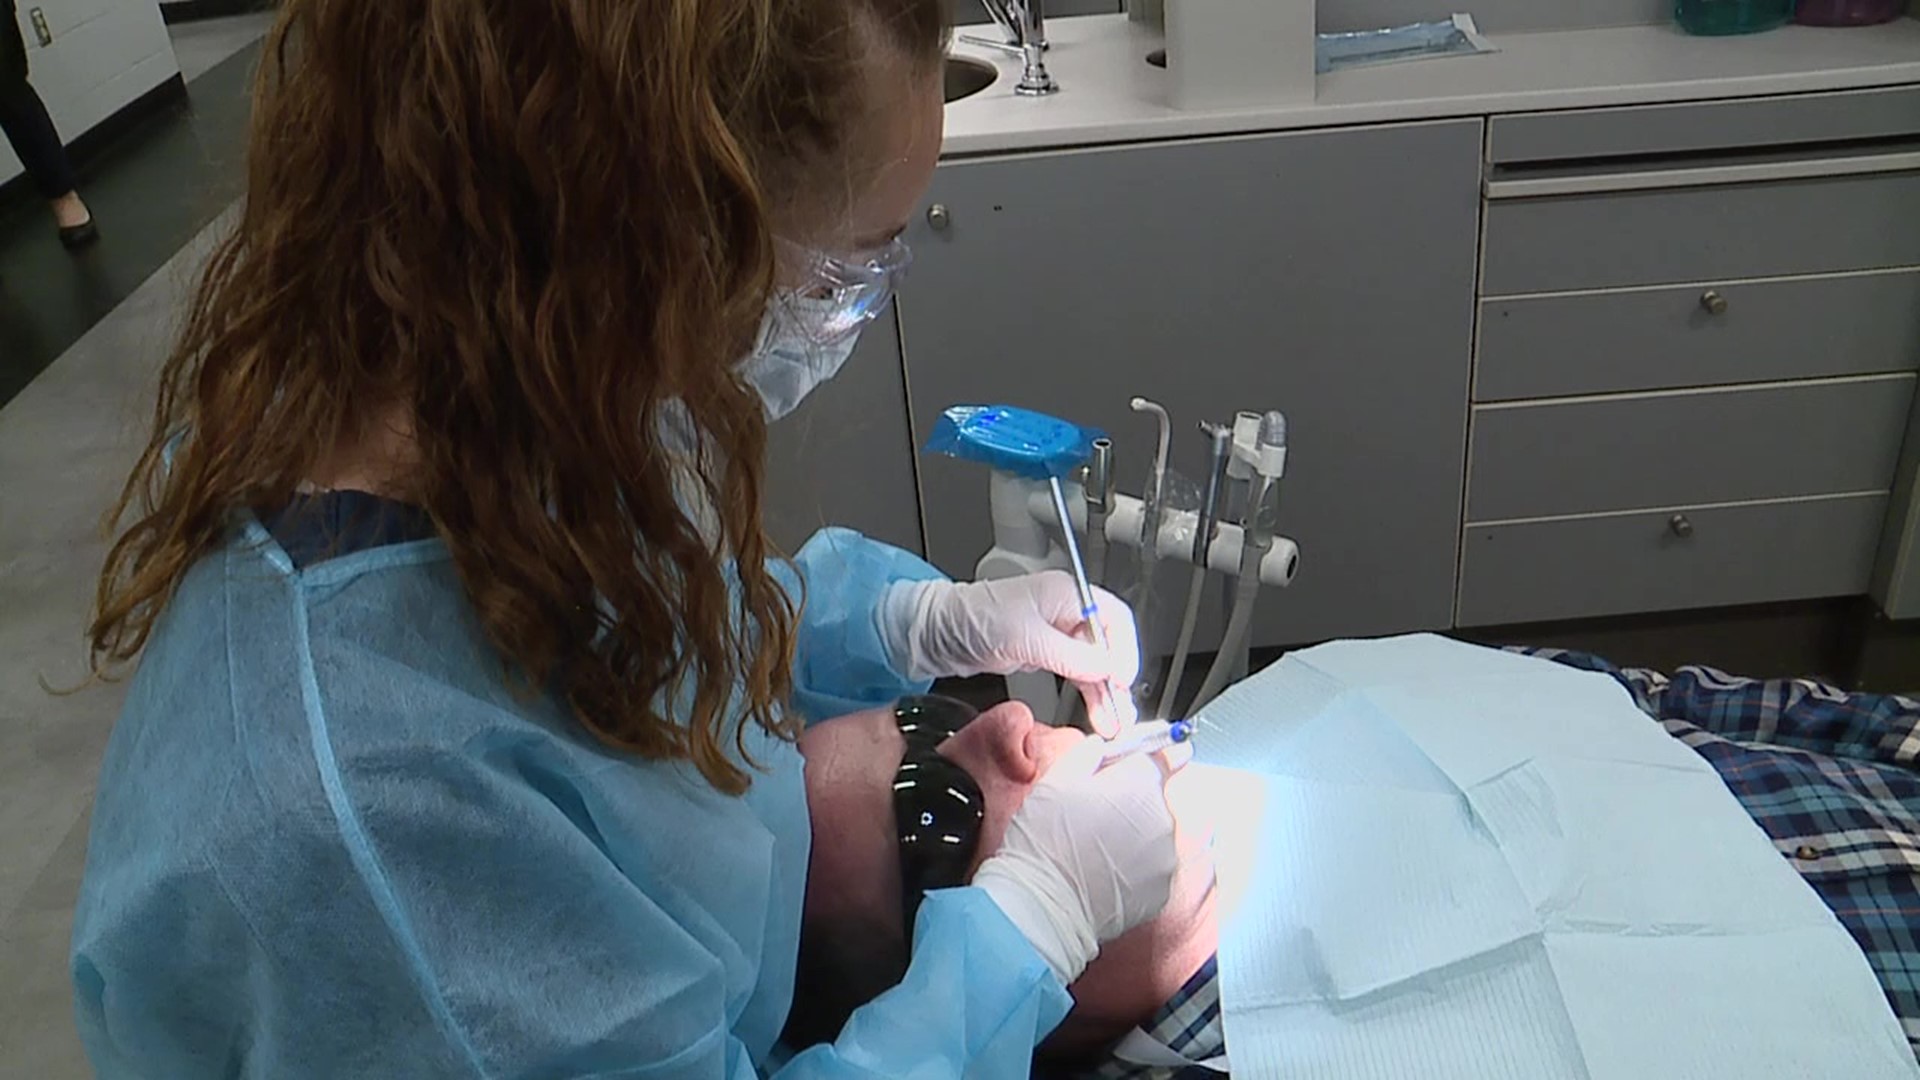 The dental hygiene program at Penn College in Williamsport will be providing free dental care to kids next month.